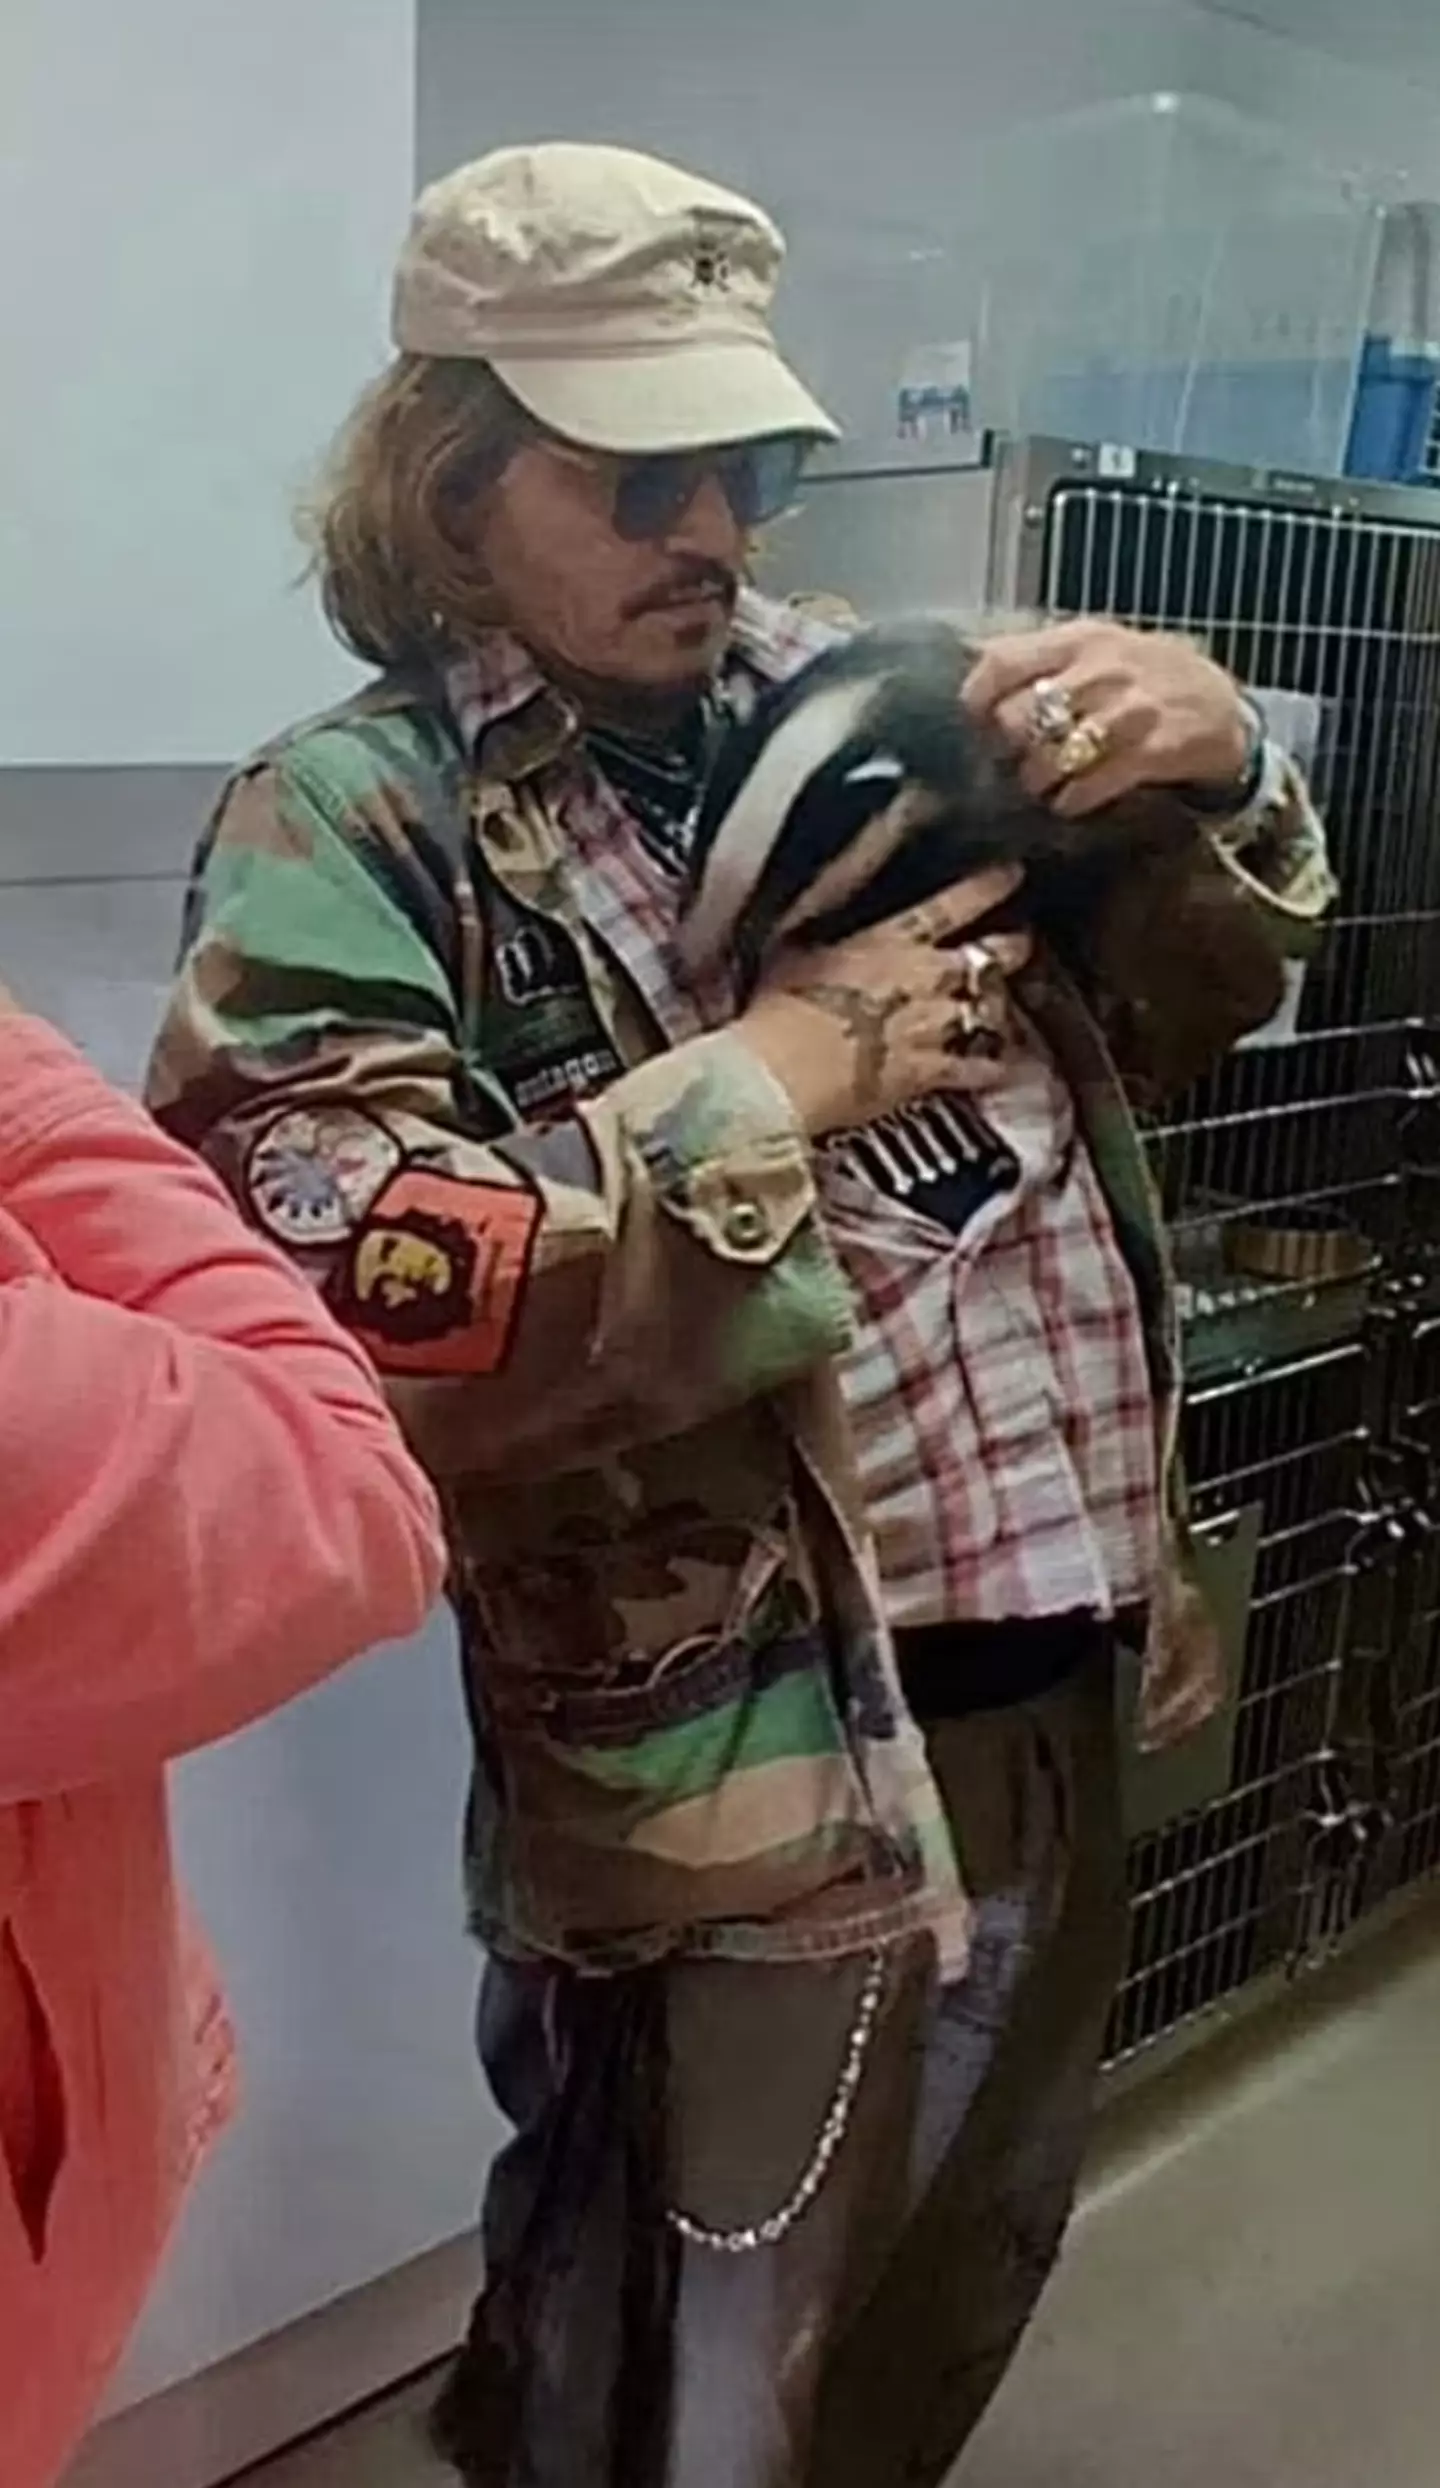 Johnny Depp has been pictured cuddling an orphaned badger at an animal rescue centre in Kent.